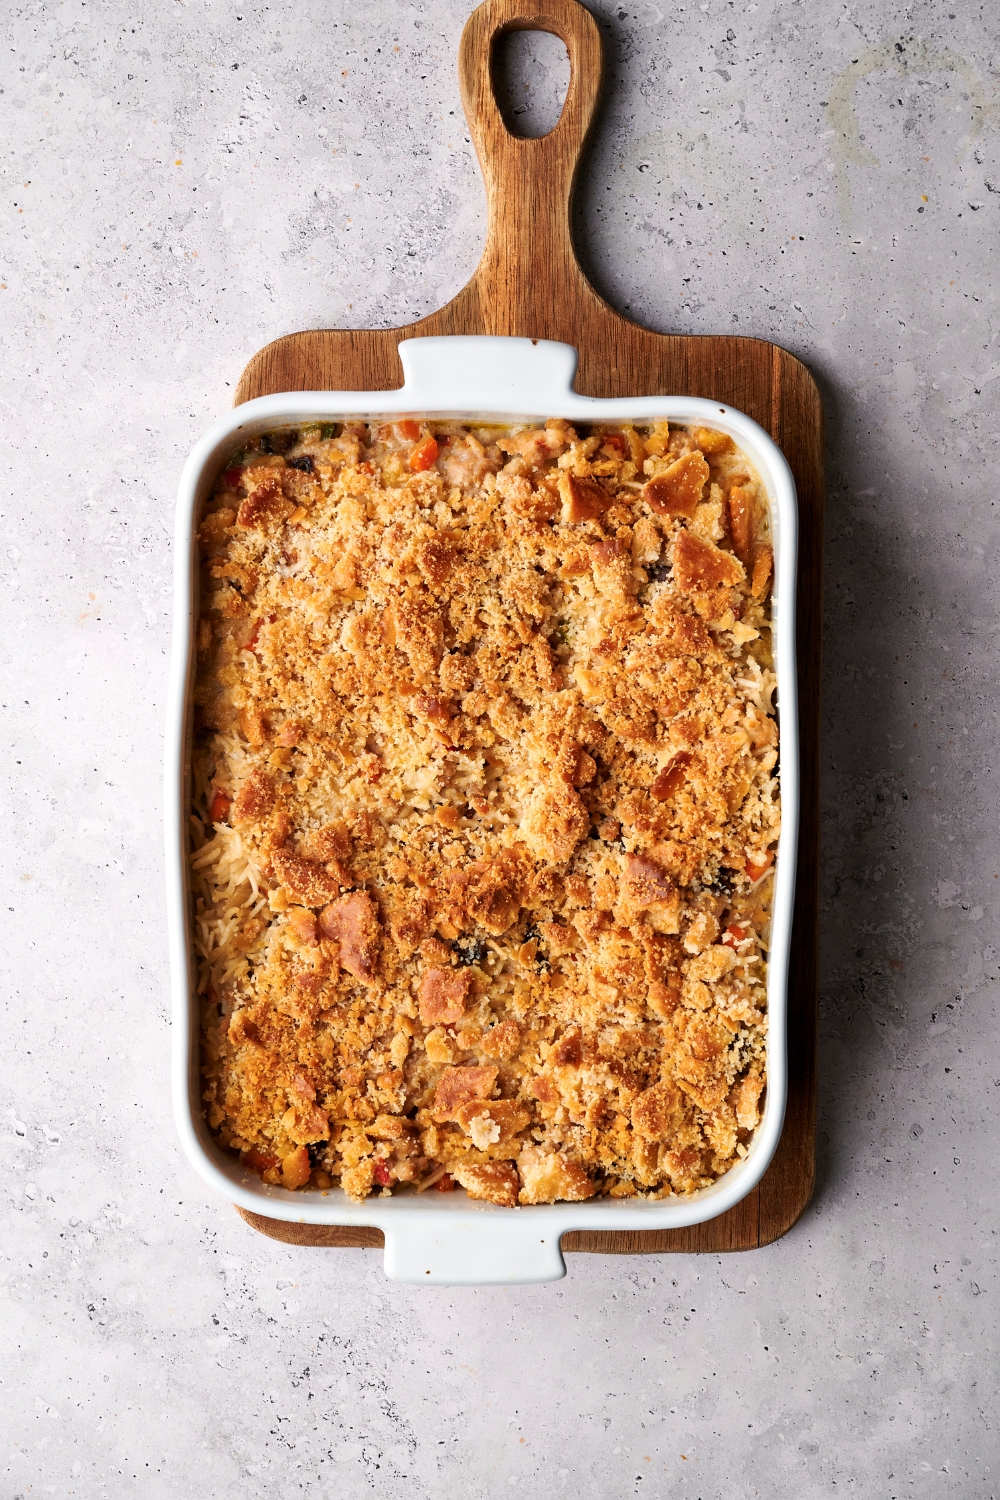 A golden brown turkey and rice casserole is in a white casserole dish on a wooden serving board.